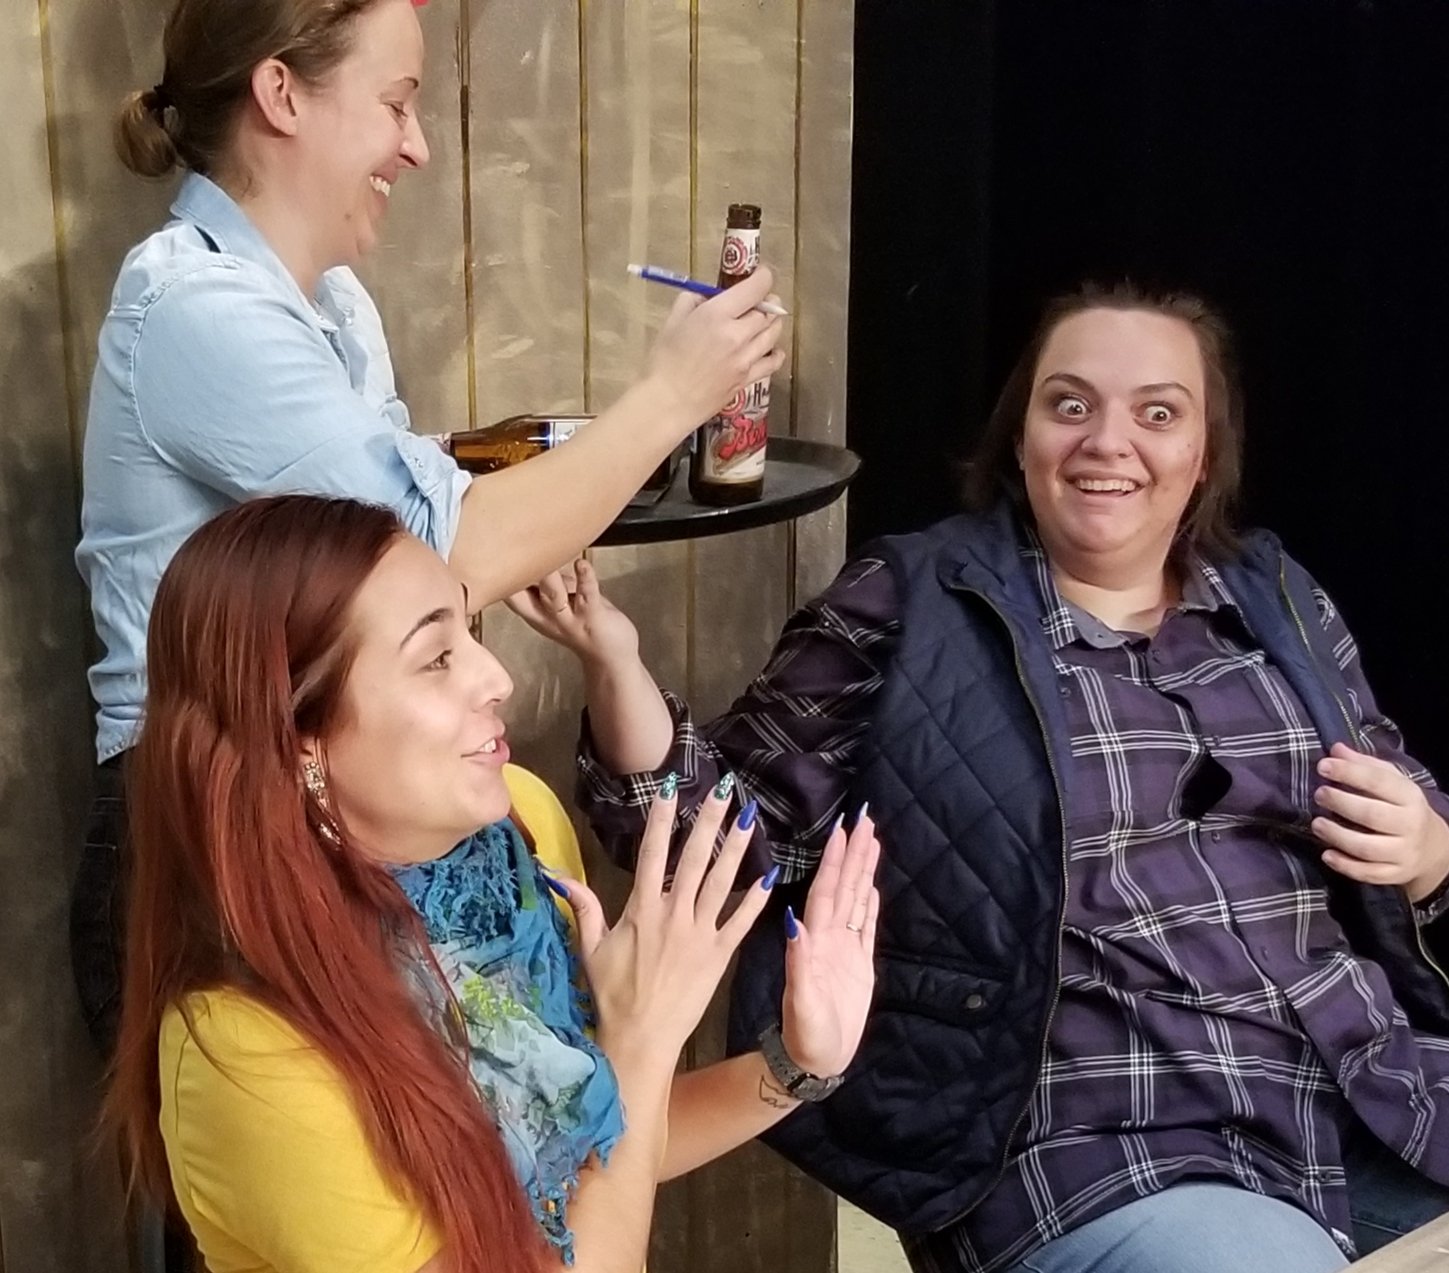 Las Cruces Community Theatre produced “Almost, Maine” last October. The cast included, left to right, Rhiannon Michelle Hardin, McKensi Alexis Cabot (standing) and Melis Derya White.